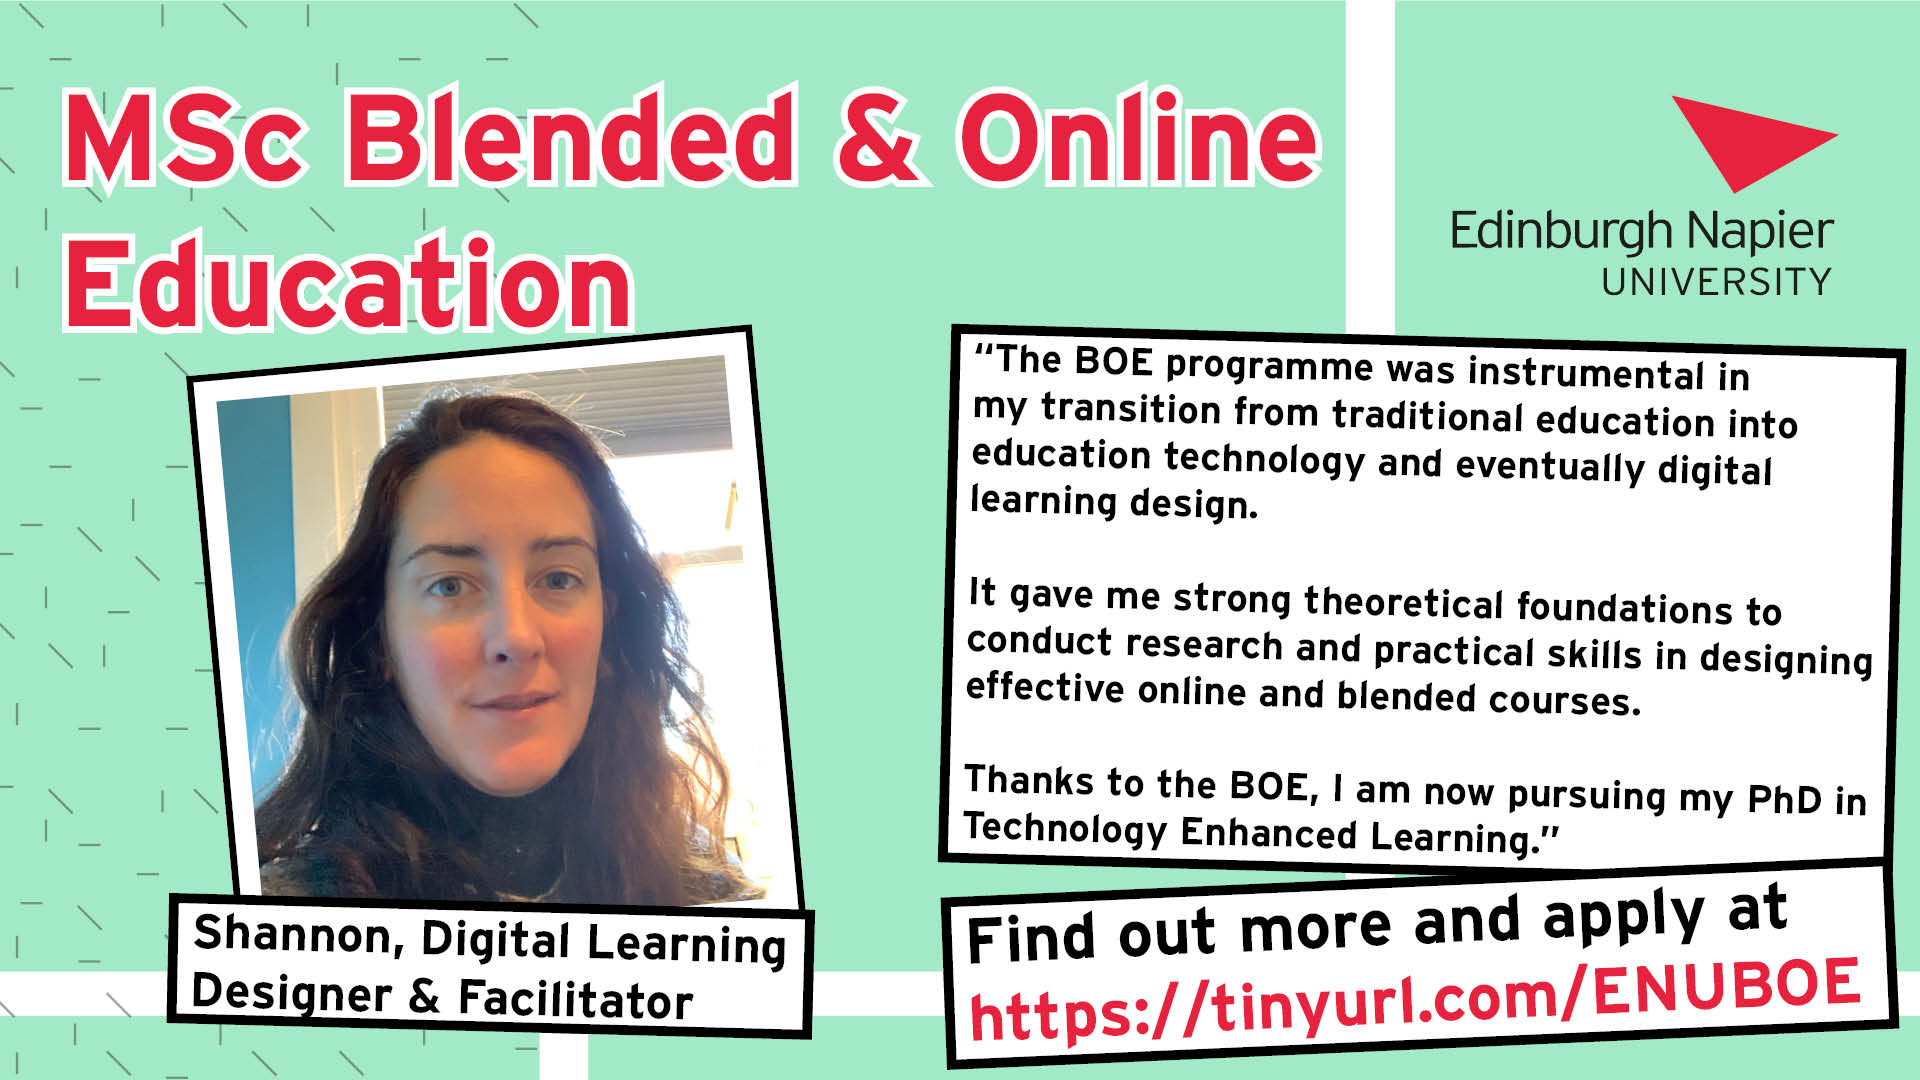 Poster for MSc Blended & Online Education at Edinburgh Napier University. Testimony from Shannon, a Digital Learning Designer & Facilitator. "The BOE programme was instrumental in my transition from traditional education into education technology and eventually digital learning design. It gave me strong theoretical foundations to conduct research and practical skills in designing effective online and blended courses. Thanks to the BOE, I am now pursuing my PhD in Technology Enhanced Learning." Find out more and apply at tinyurl.com/ENUBOE